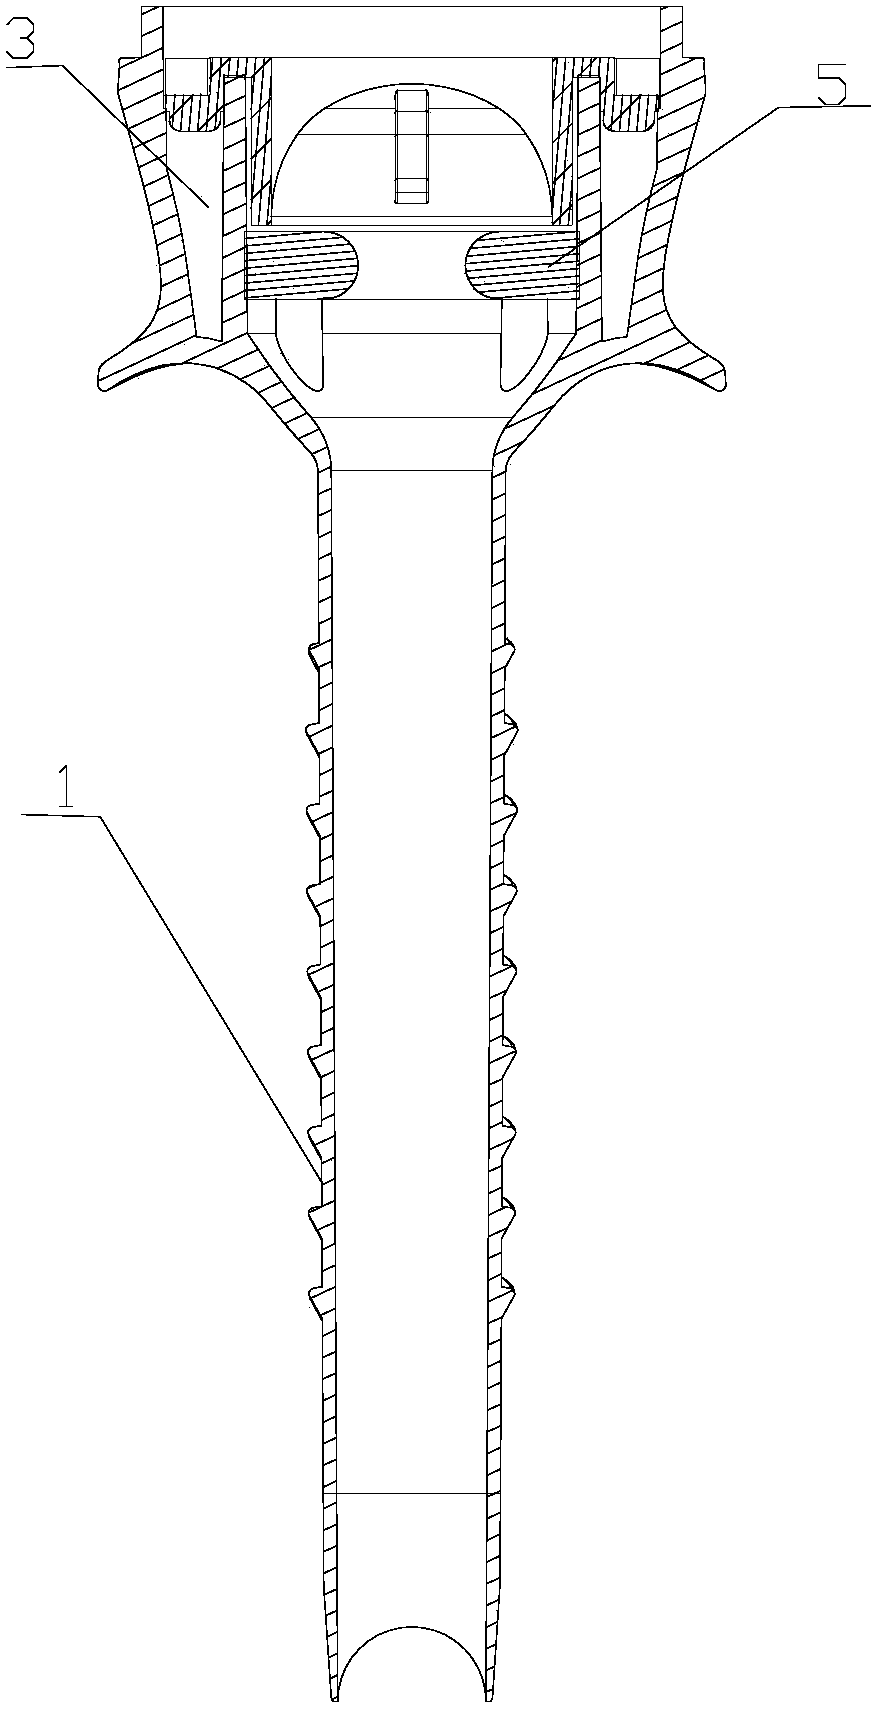 Self-lubricating disposable puncture device